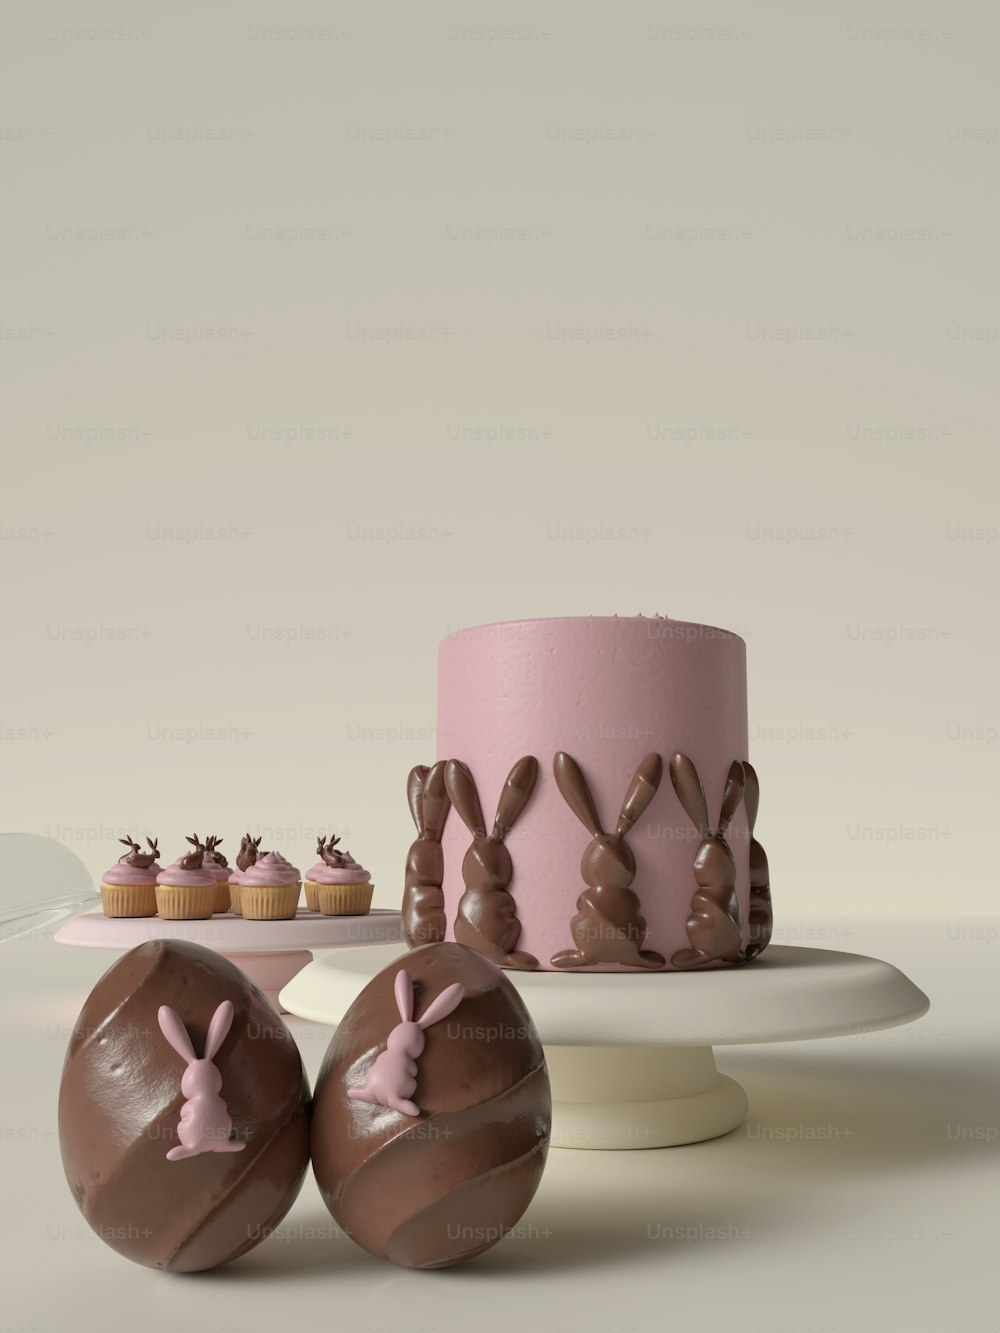 a pink cake with chocolate bunny ears next to it